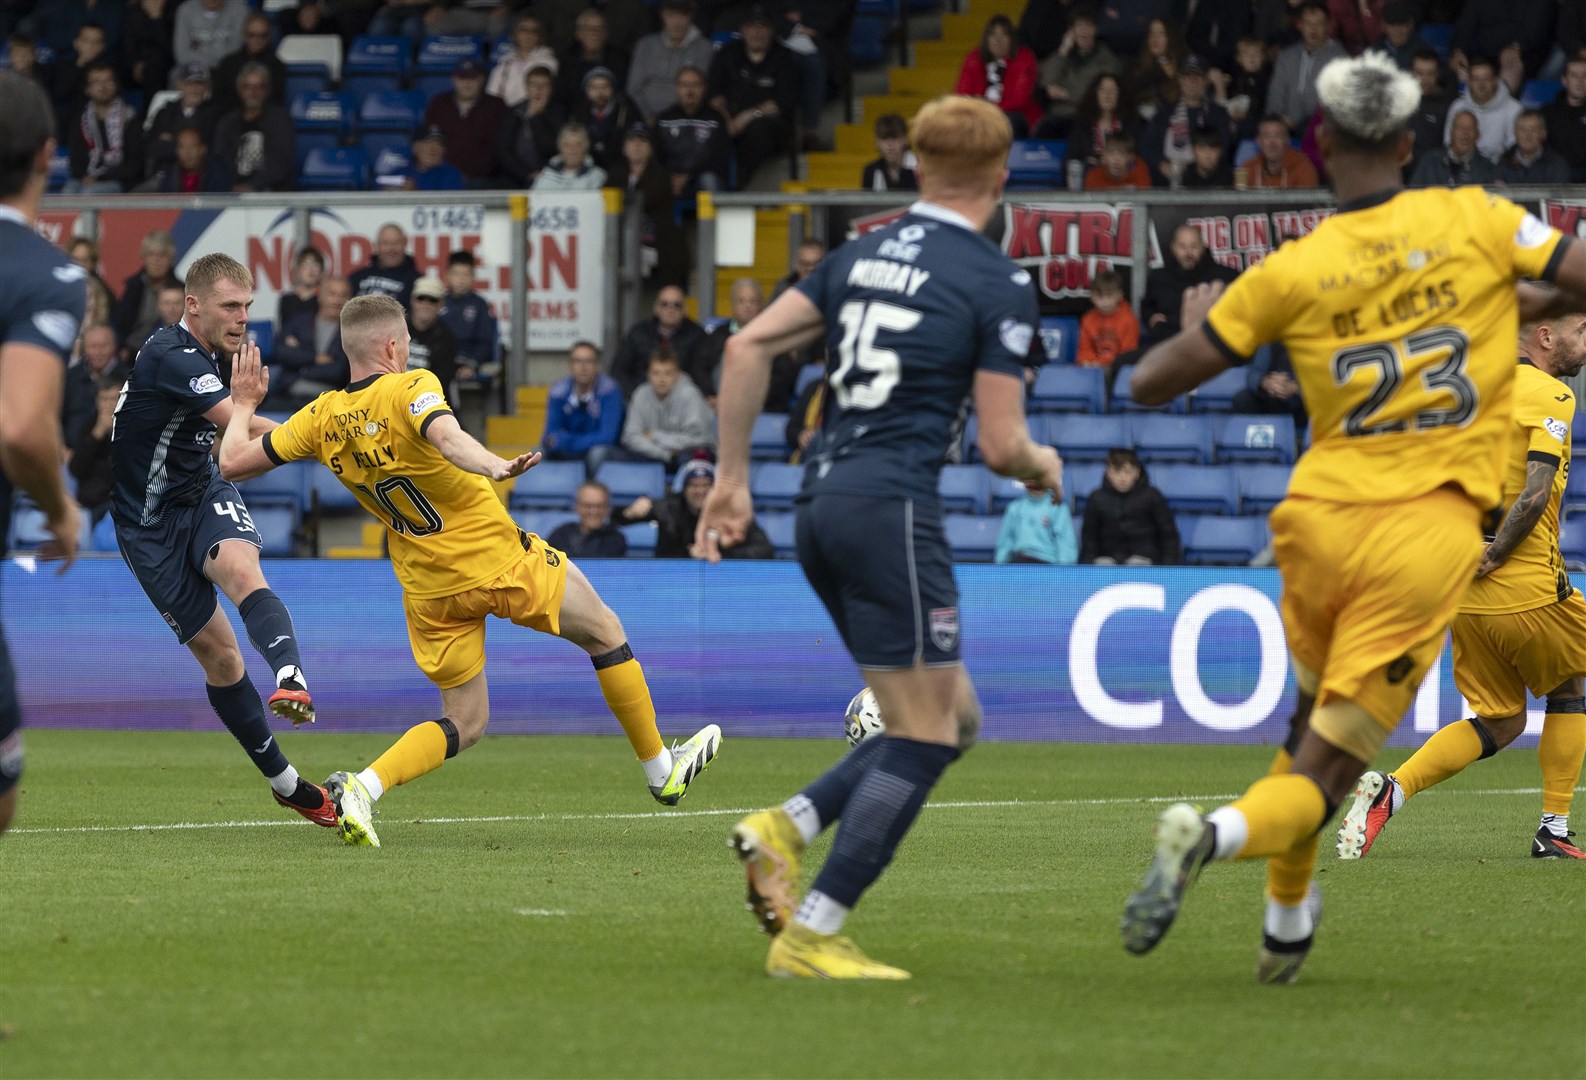 Josh Reid took aim at goal against Livingston – but did not mind Simon Murray nipping in to score instead. Picture: Ken Macpherson